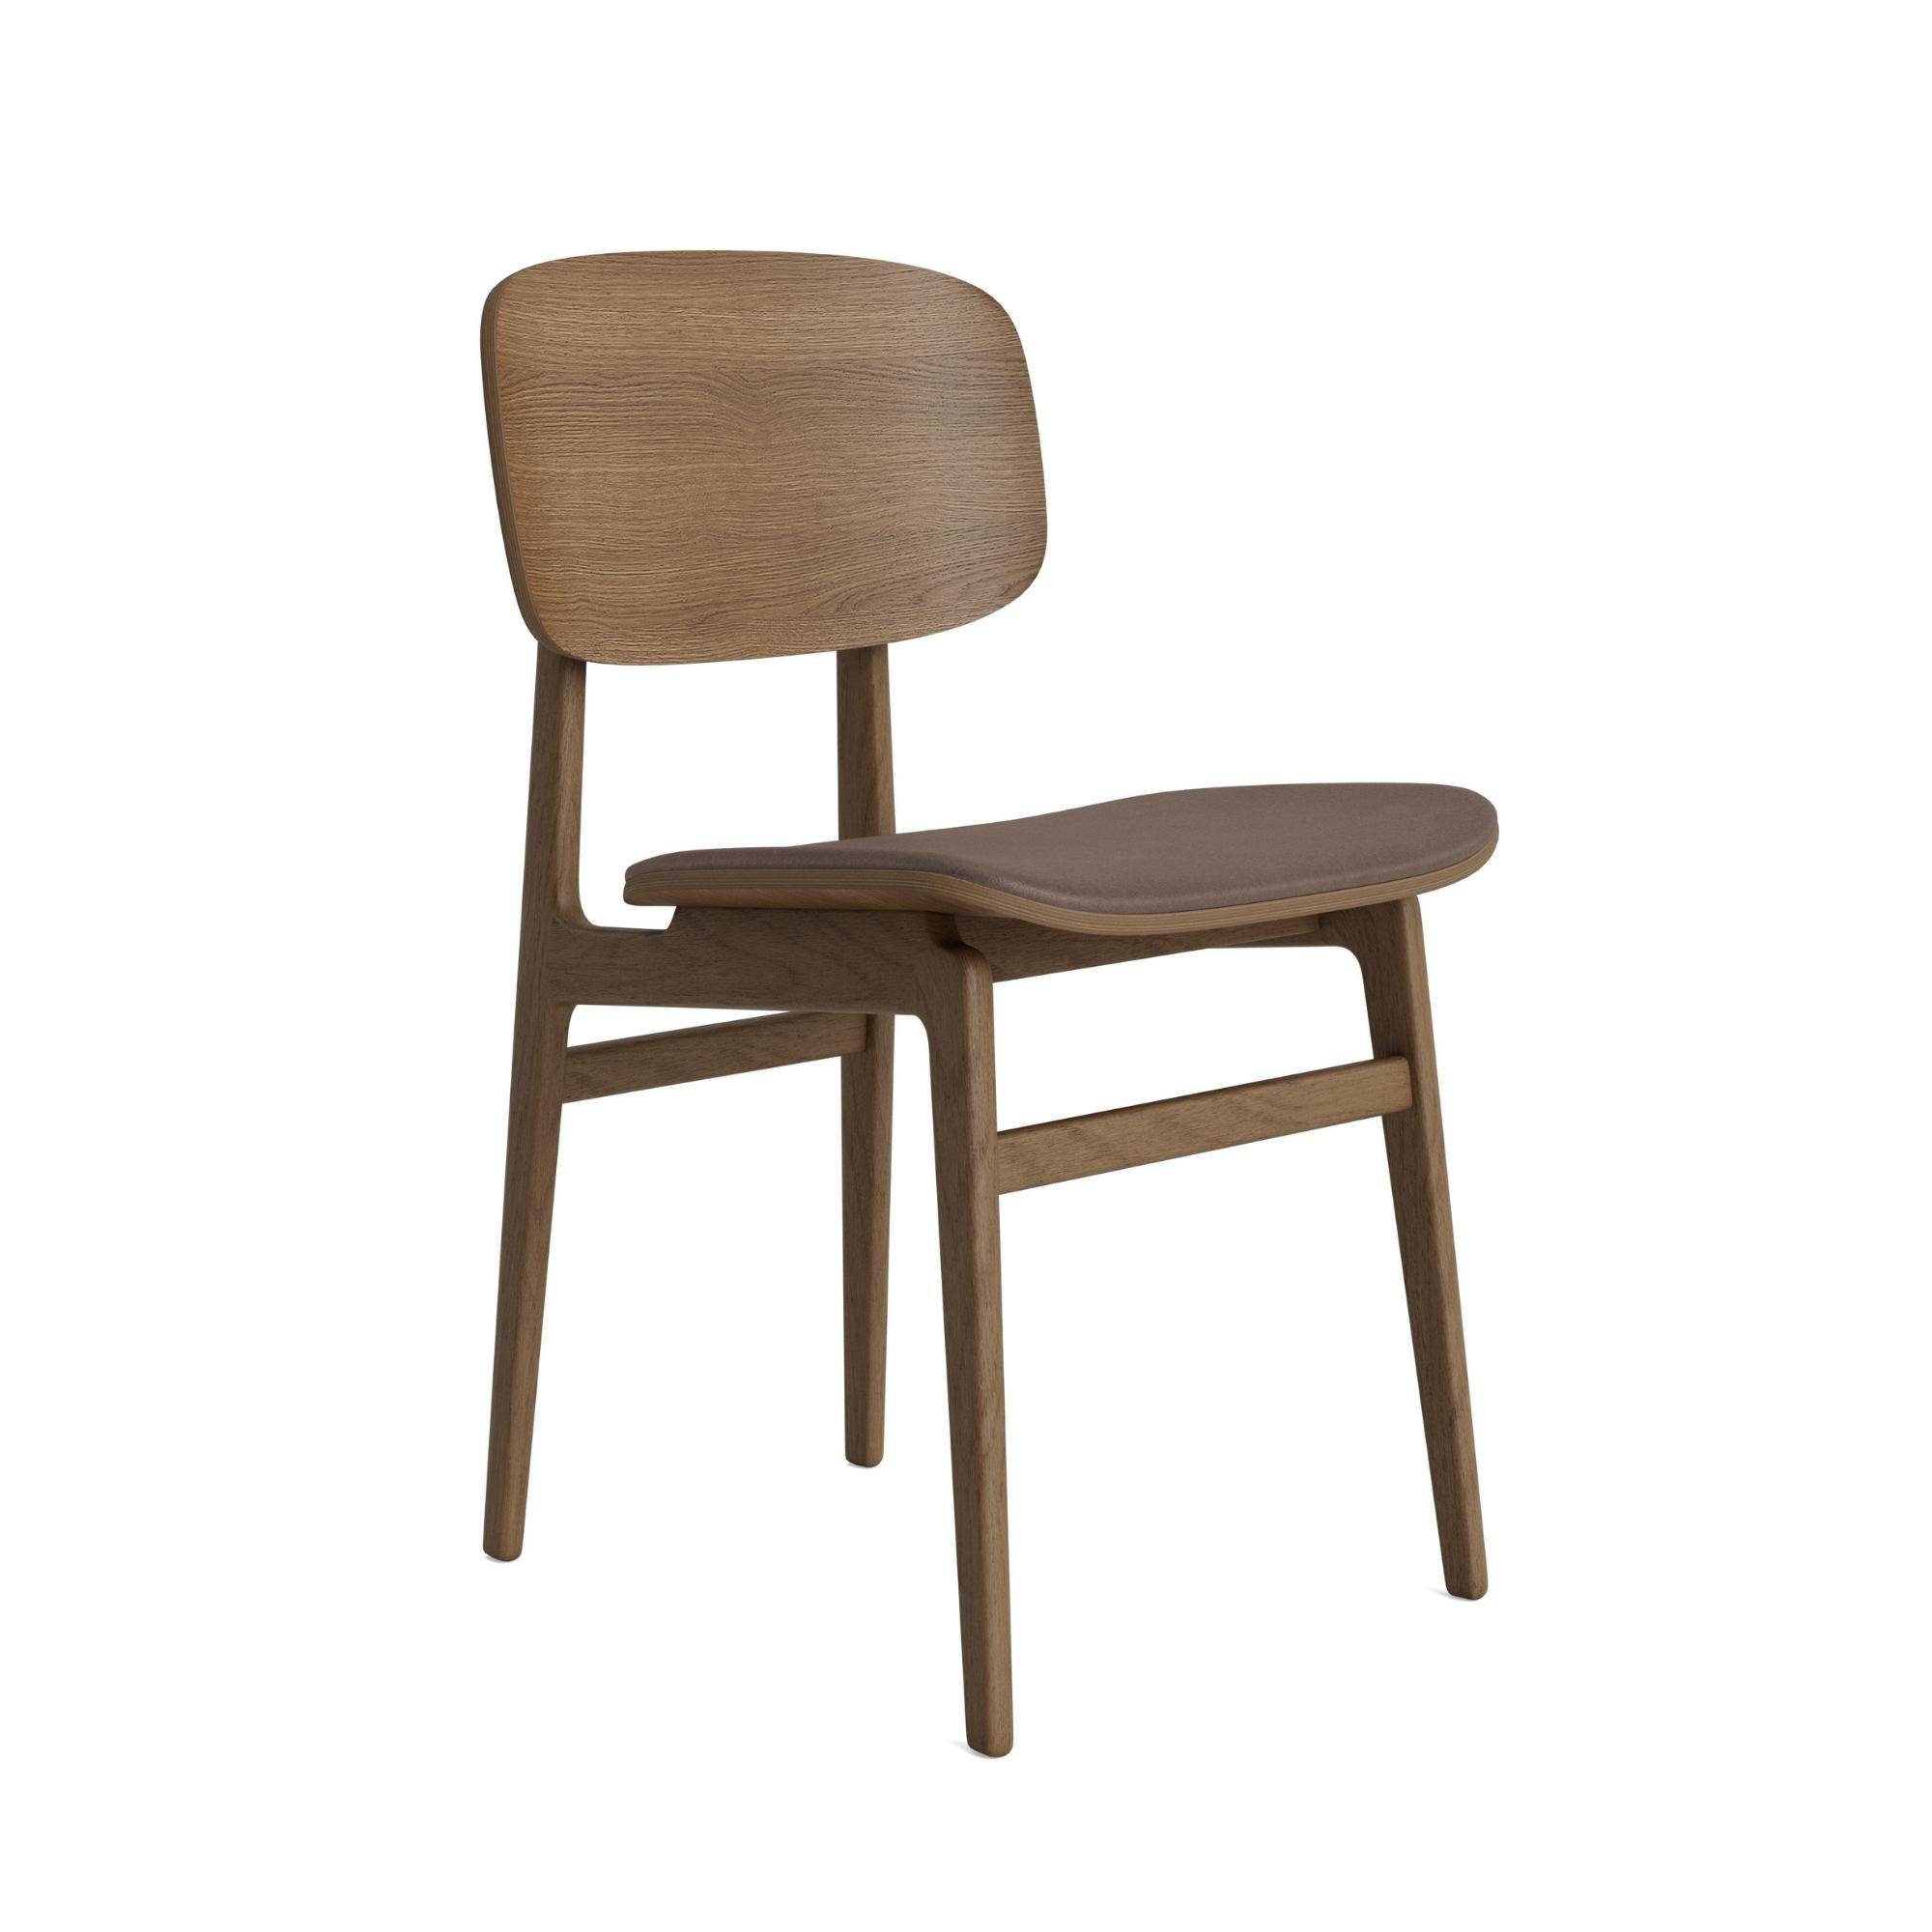 NY11 Chair - Leather